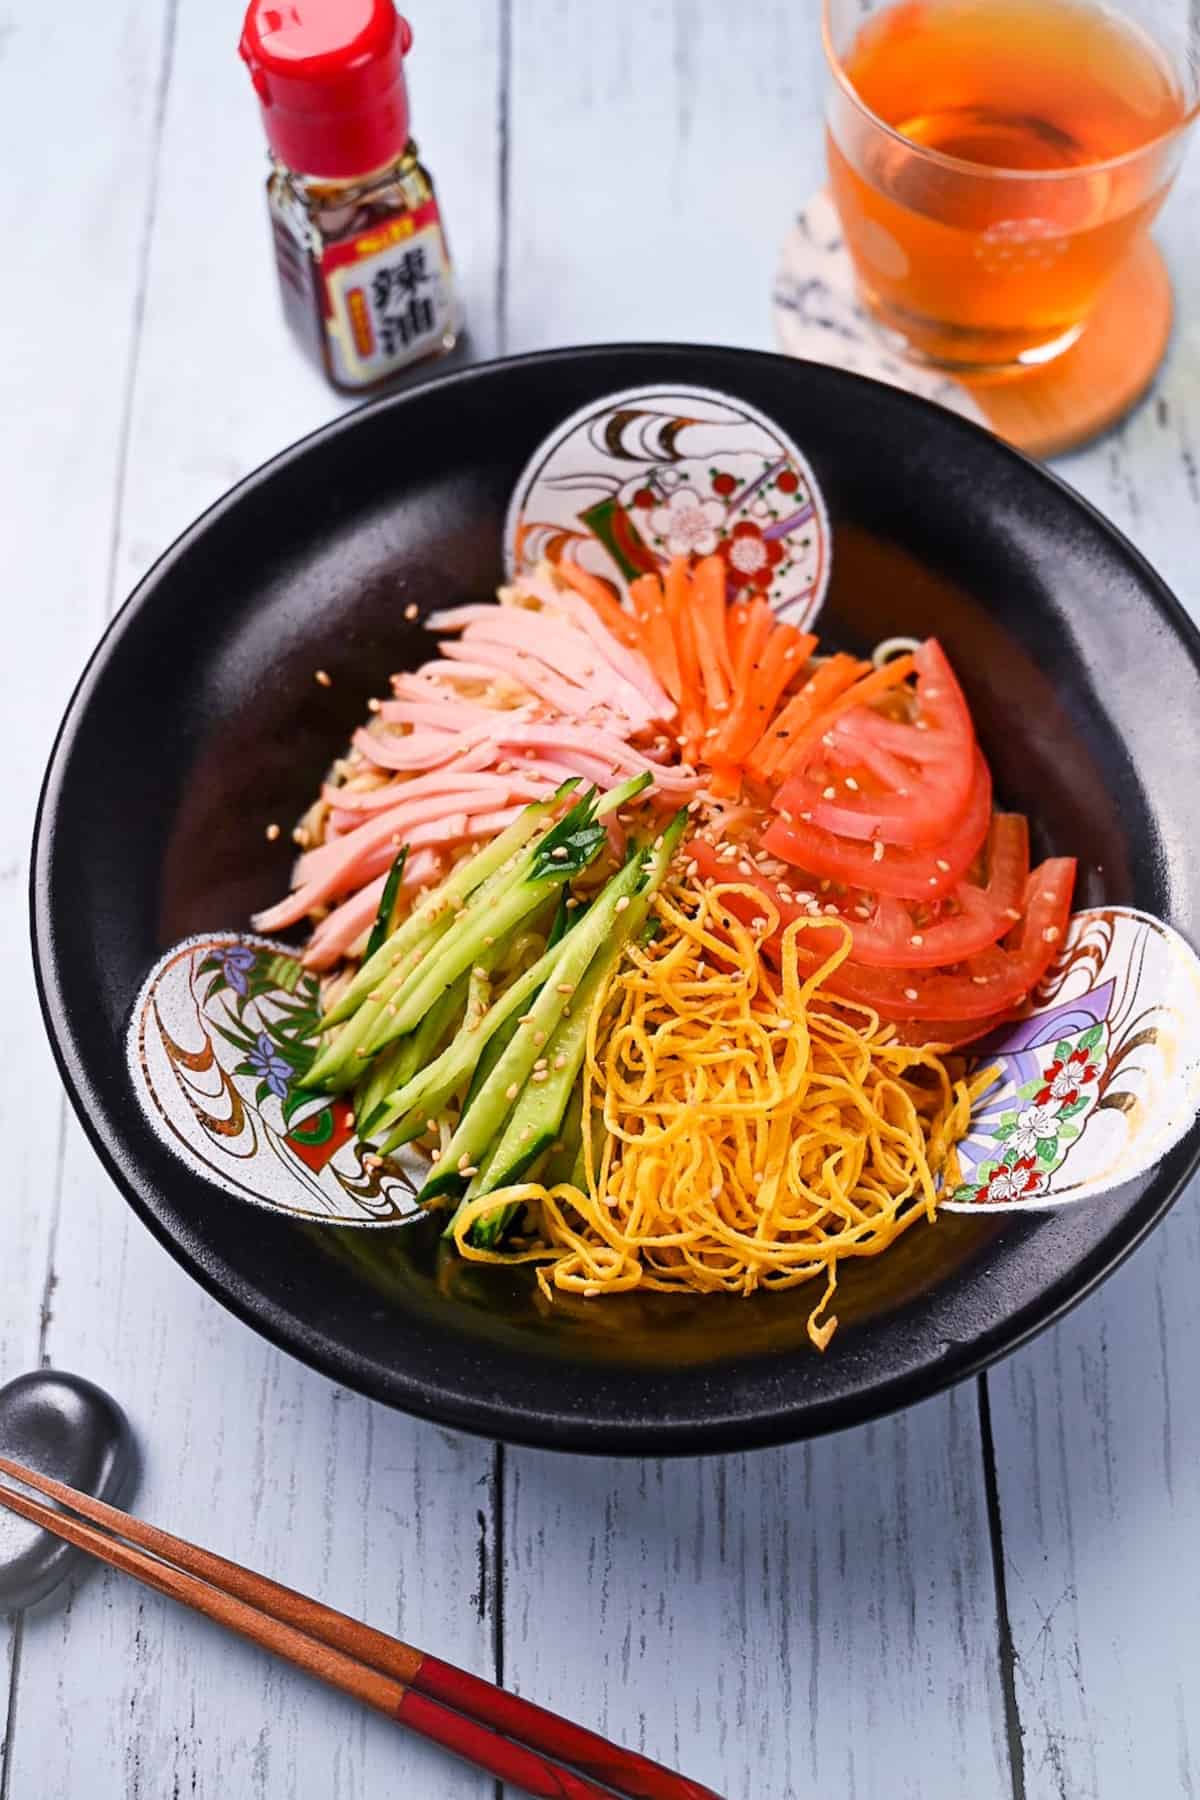 Hiyashi chuka made with ramen noodles topped with ham, carrots, tomatoes, egg crepe and cucumber with a tangy soy-based sauce in a black Chinese style bowl